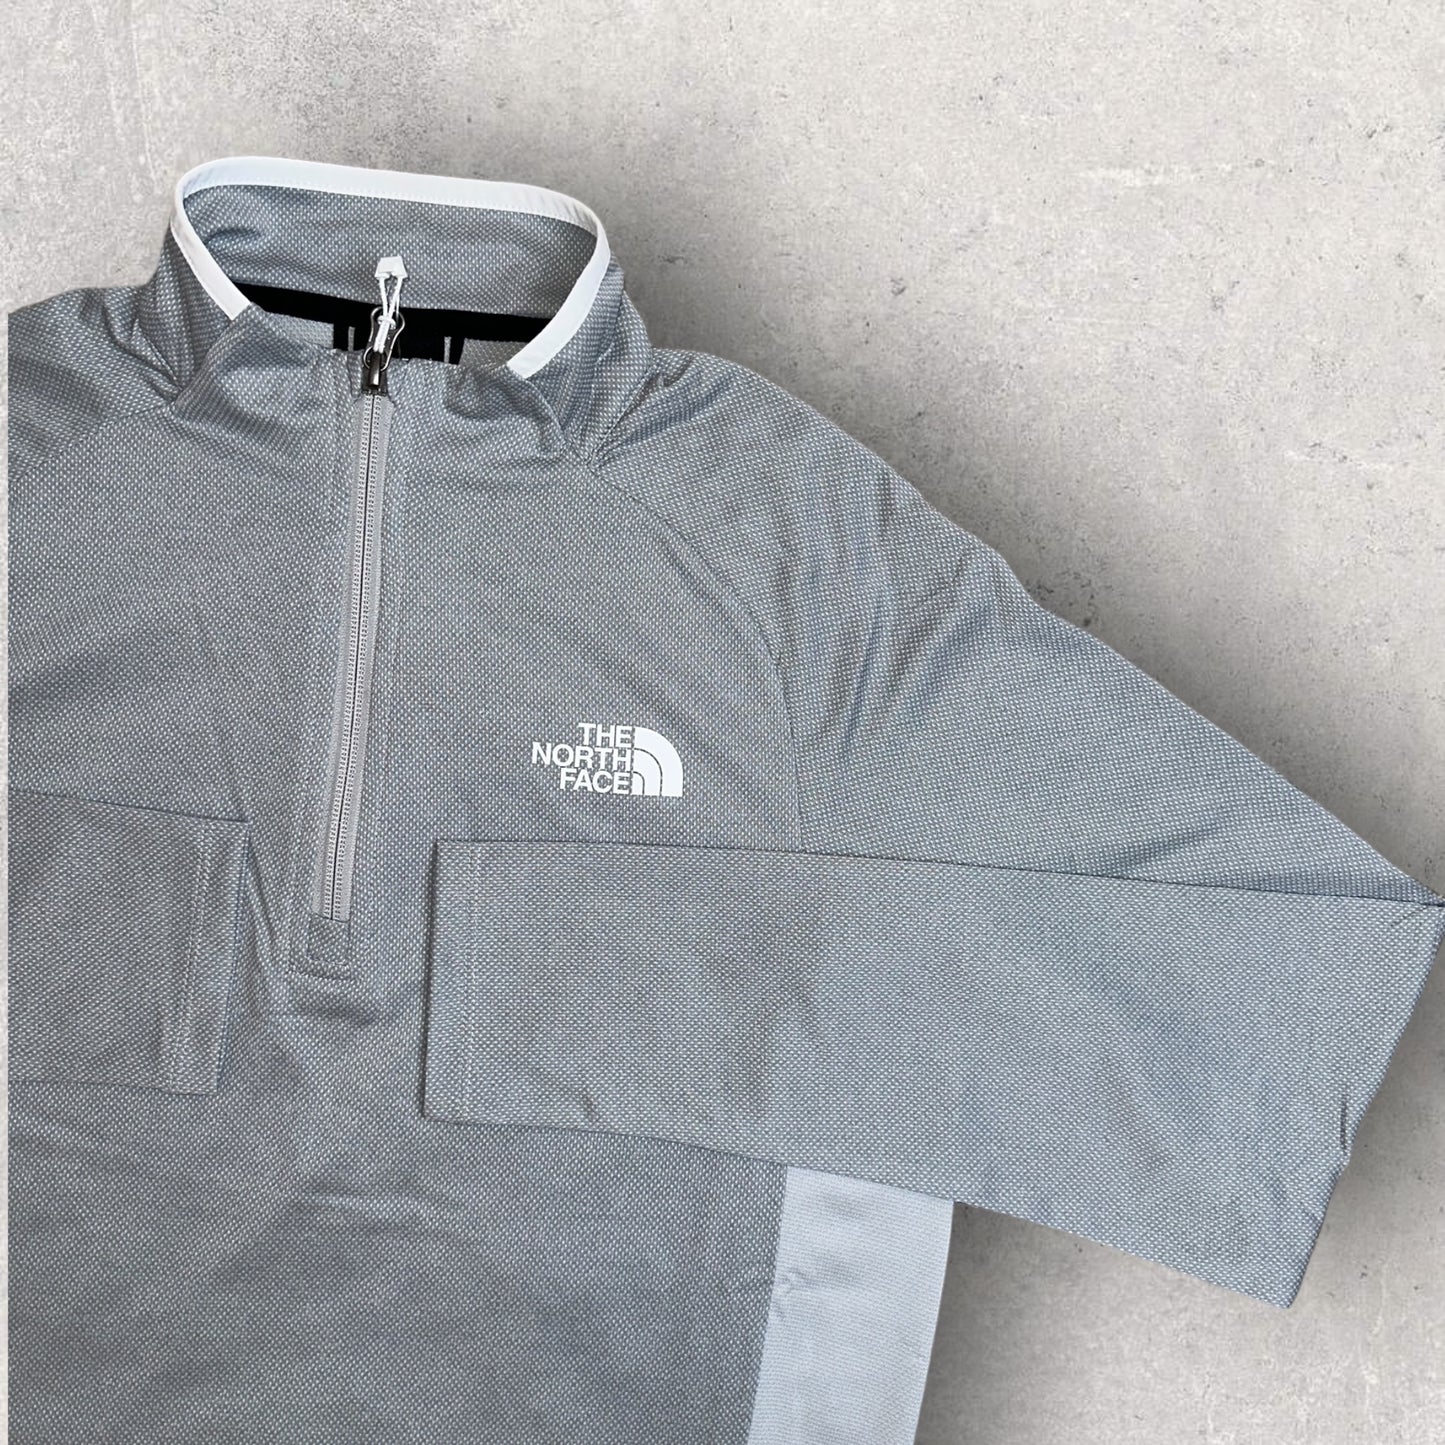 NORTH FACE PERFORMANCE 1/4 ZIP - GREY